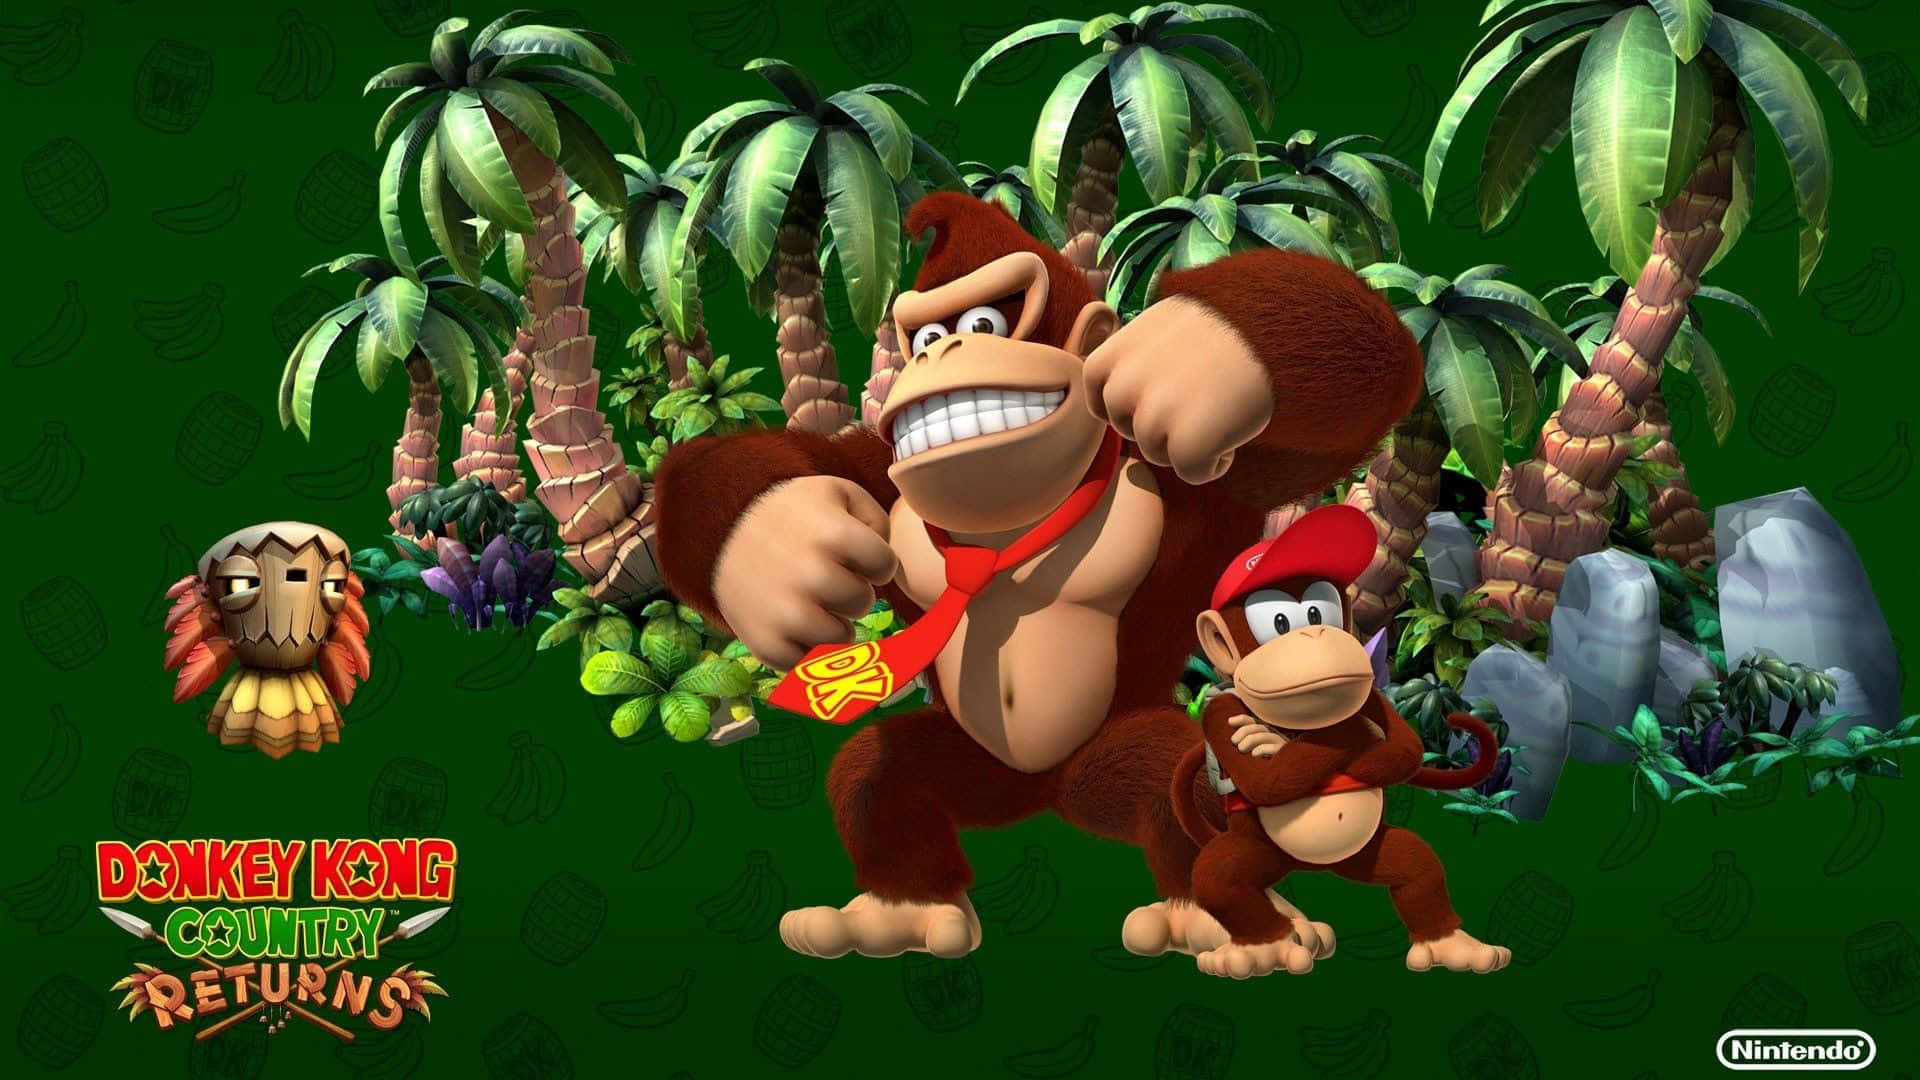 Donkey Kong In Action Against His Adversaries In An Exciting Arcade Game Setting. Background